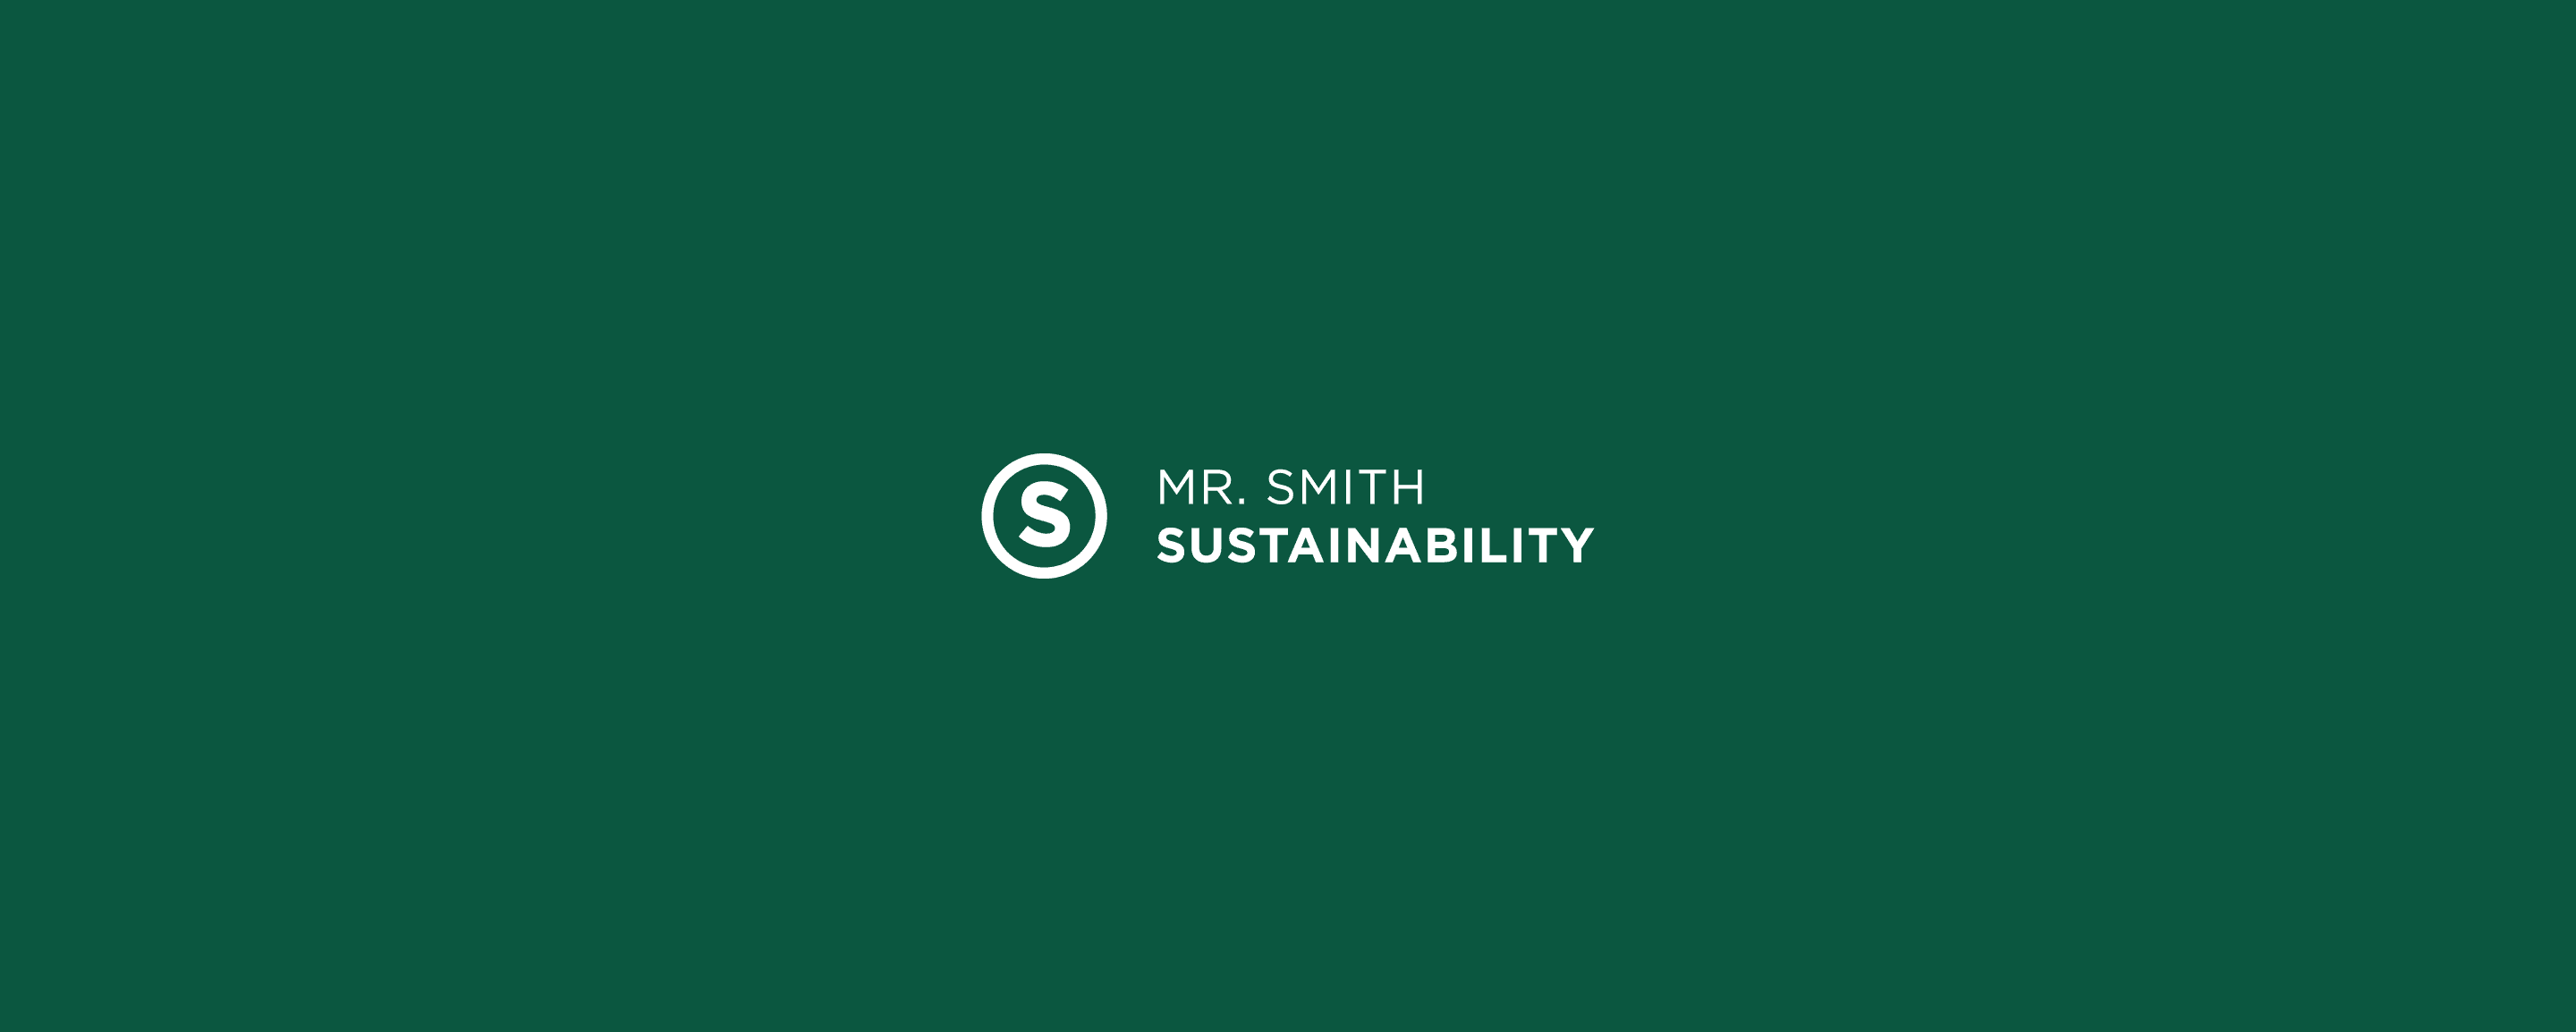 Our Sustainability Promise